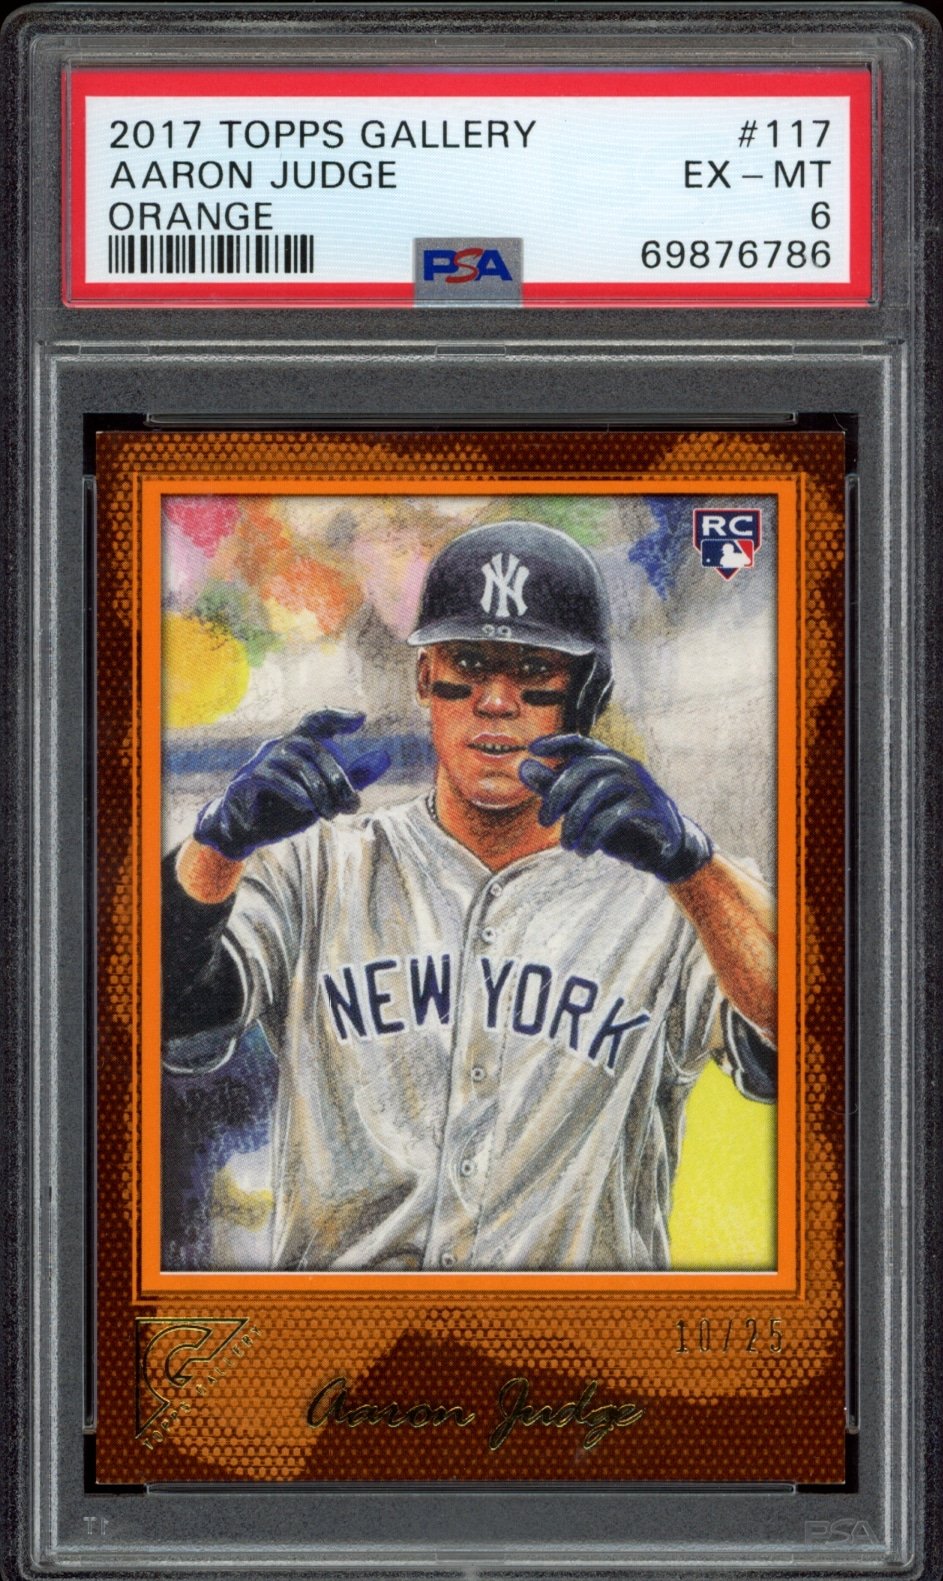 Aaron Judges 2017 Topps Gallery card #117, graded EX-MT 6 by PSA, in canvas orange design.